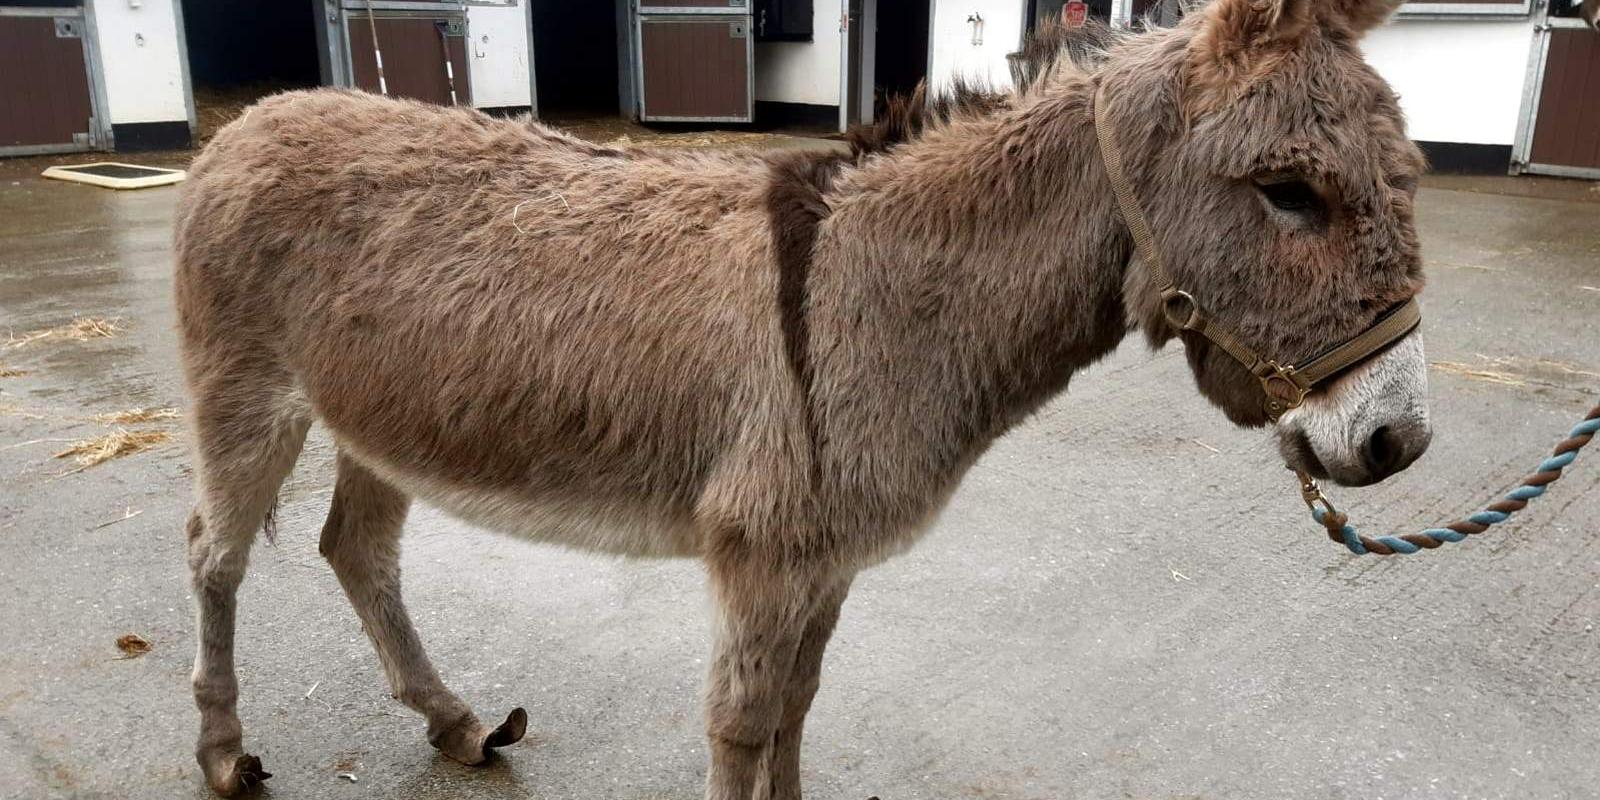 Donkey with long hooves